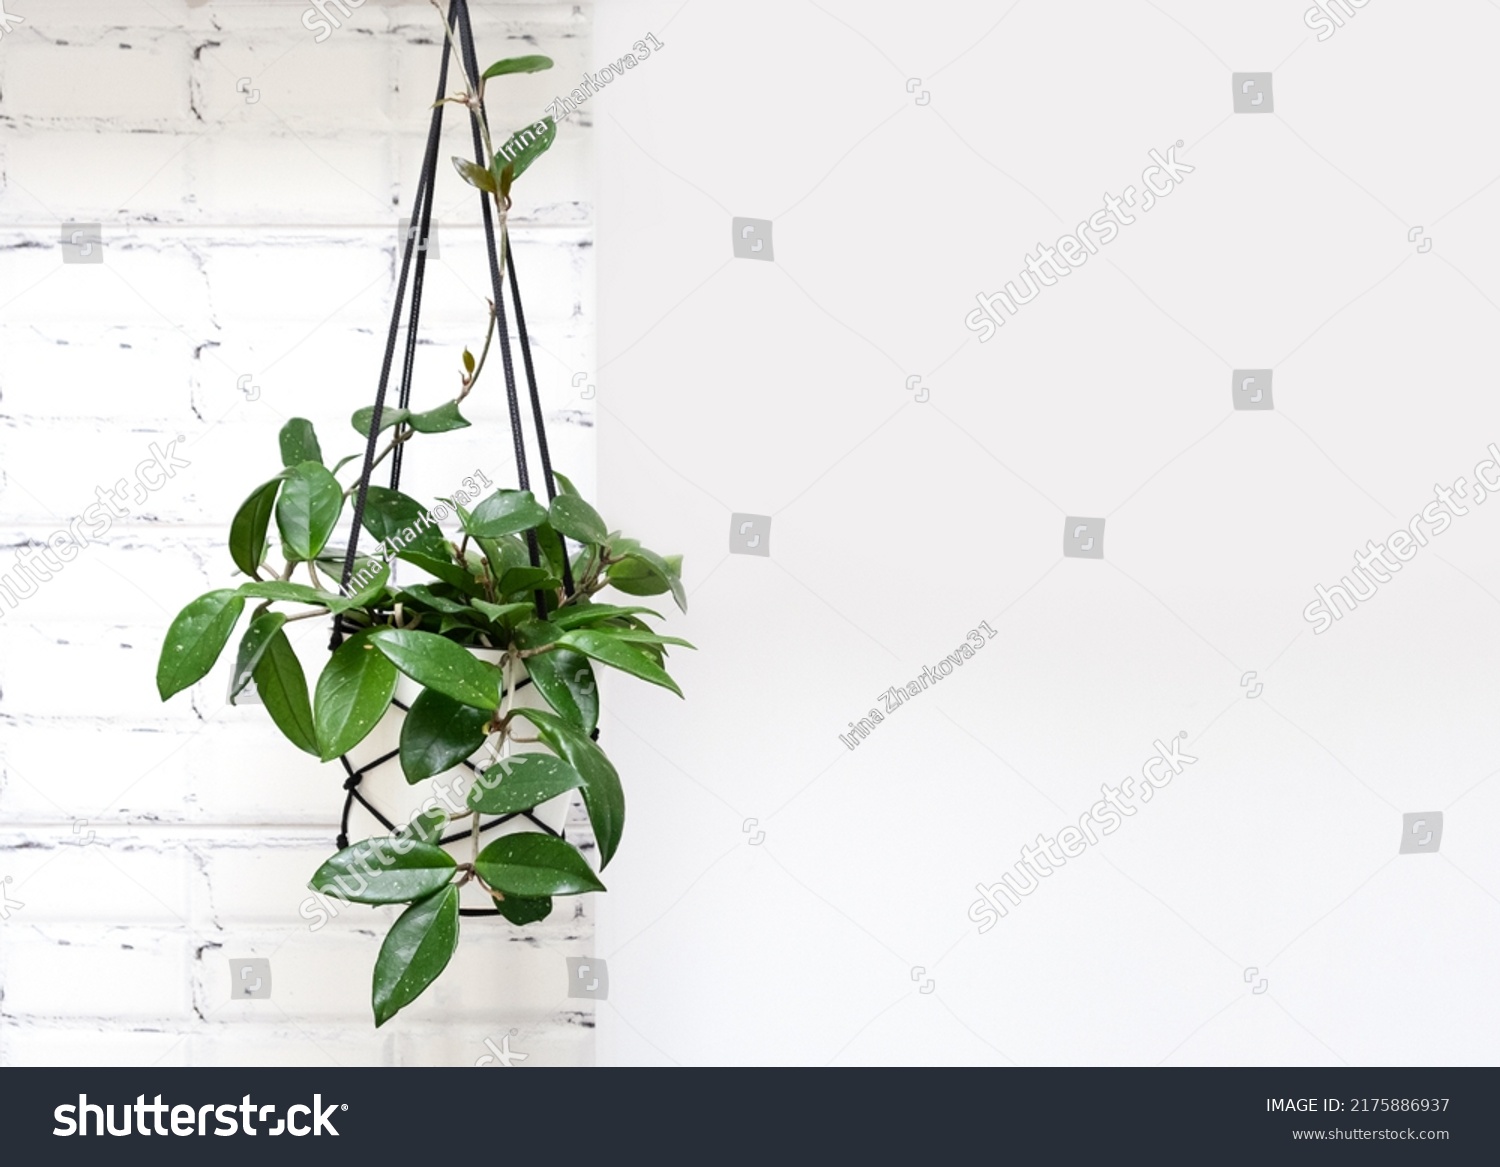 Hoya krohniana in a white pot in a wicker macrame planter hanging isolate on a white background. lacunosa heart leaf. Close-up of a plant. Waxy plant in a pot.Houseplant Hoya bella erythrophylla. #2175886937